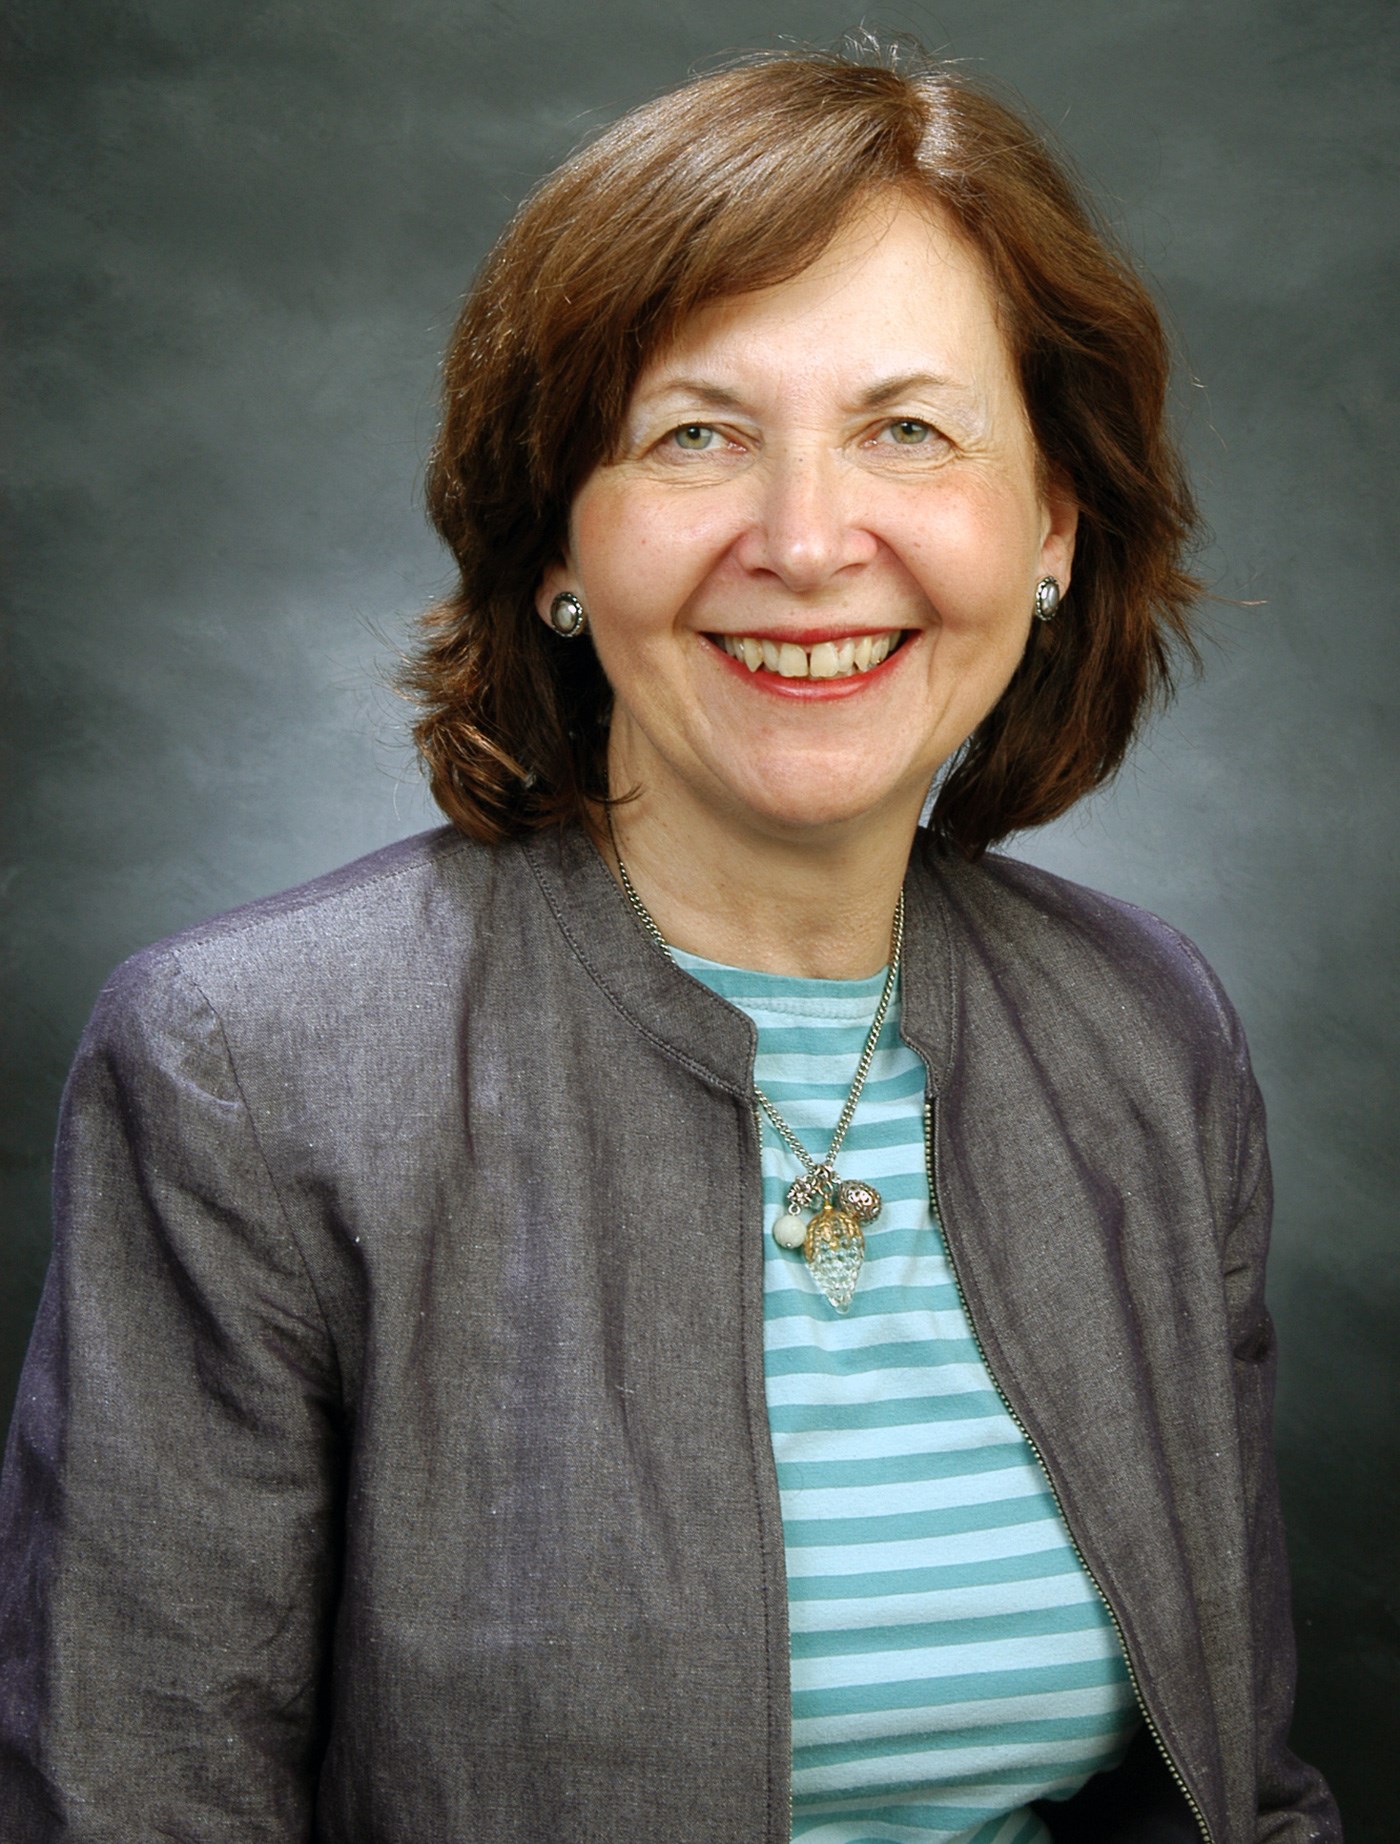 Carol McDonough is a Professor, MSP President in the Economics Department at UMass Lowell.